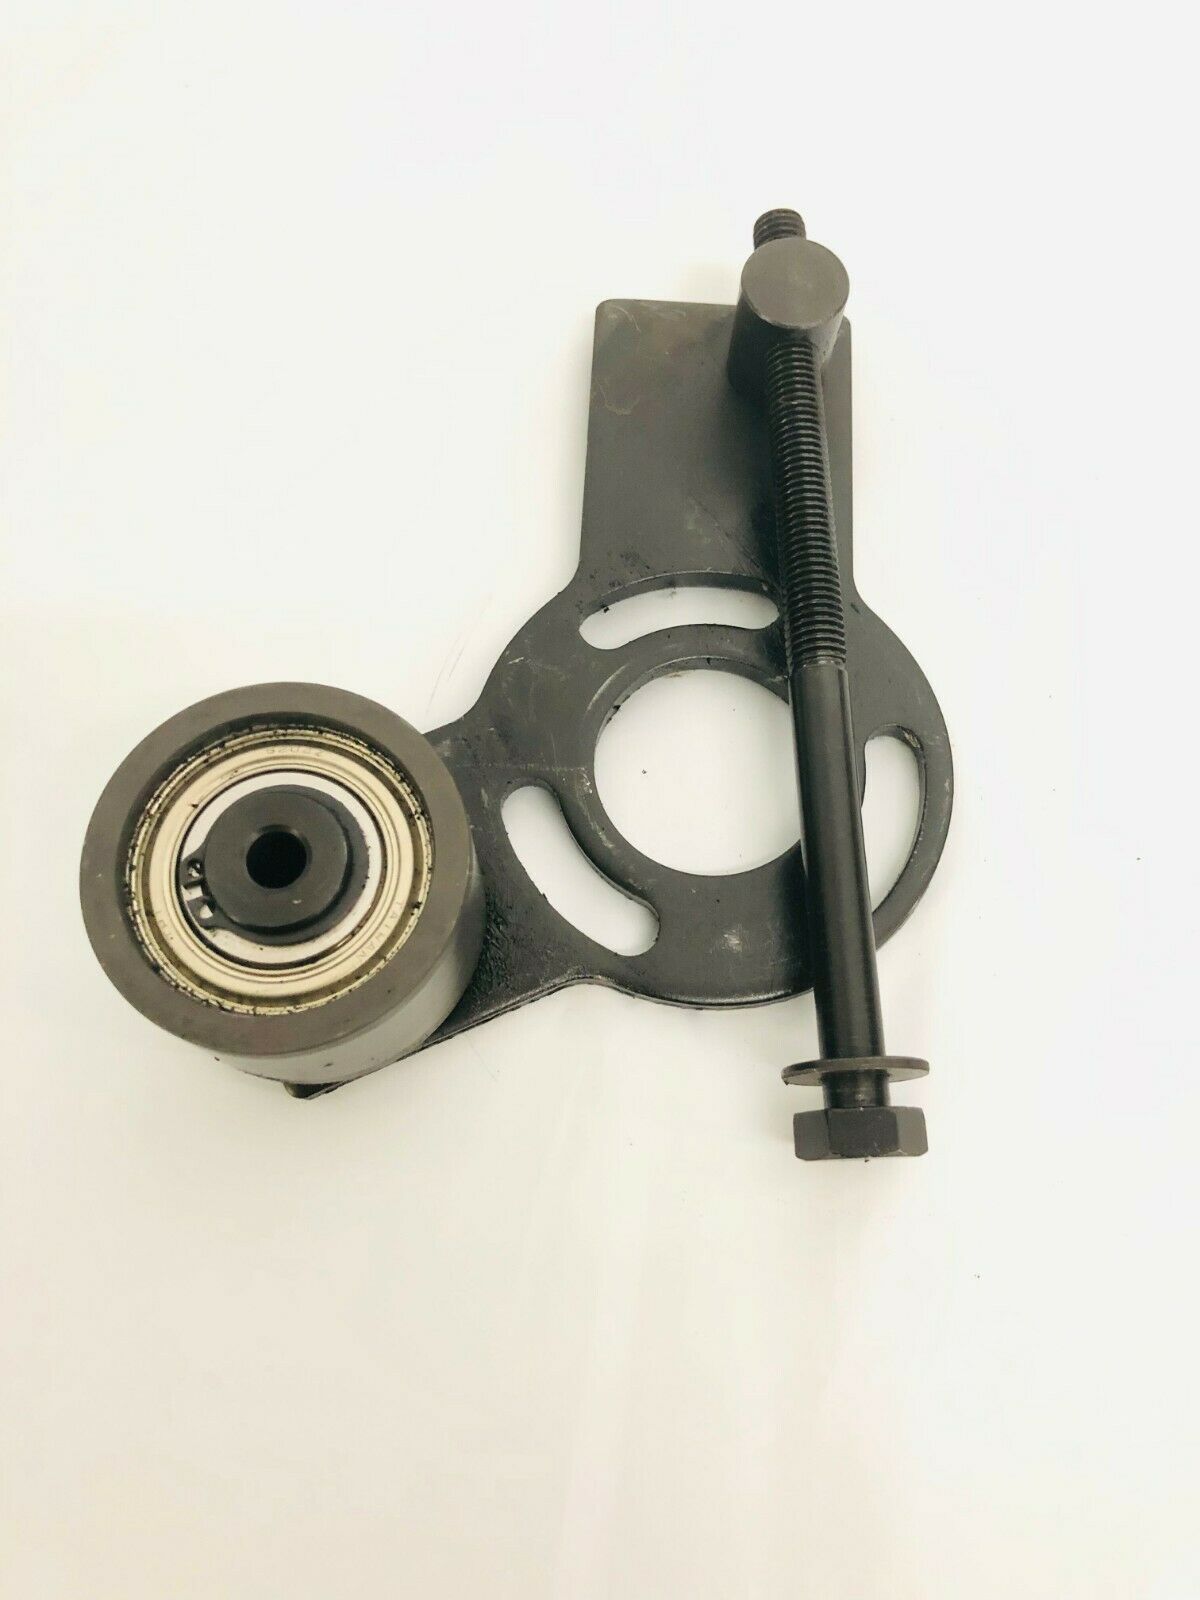 True Fitness XCSX XCS800 Elliptical Tensioner 2nd Stage Assembly (Used)